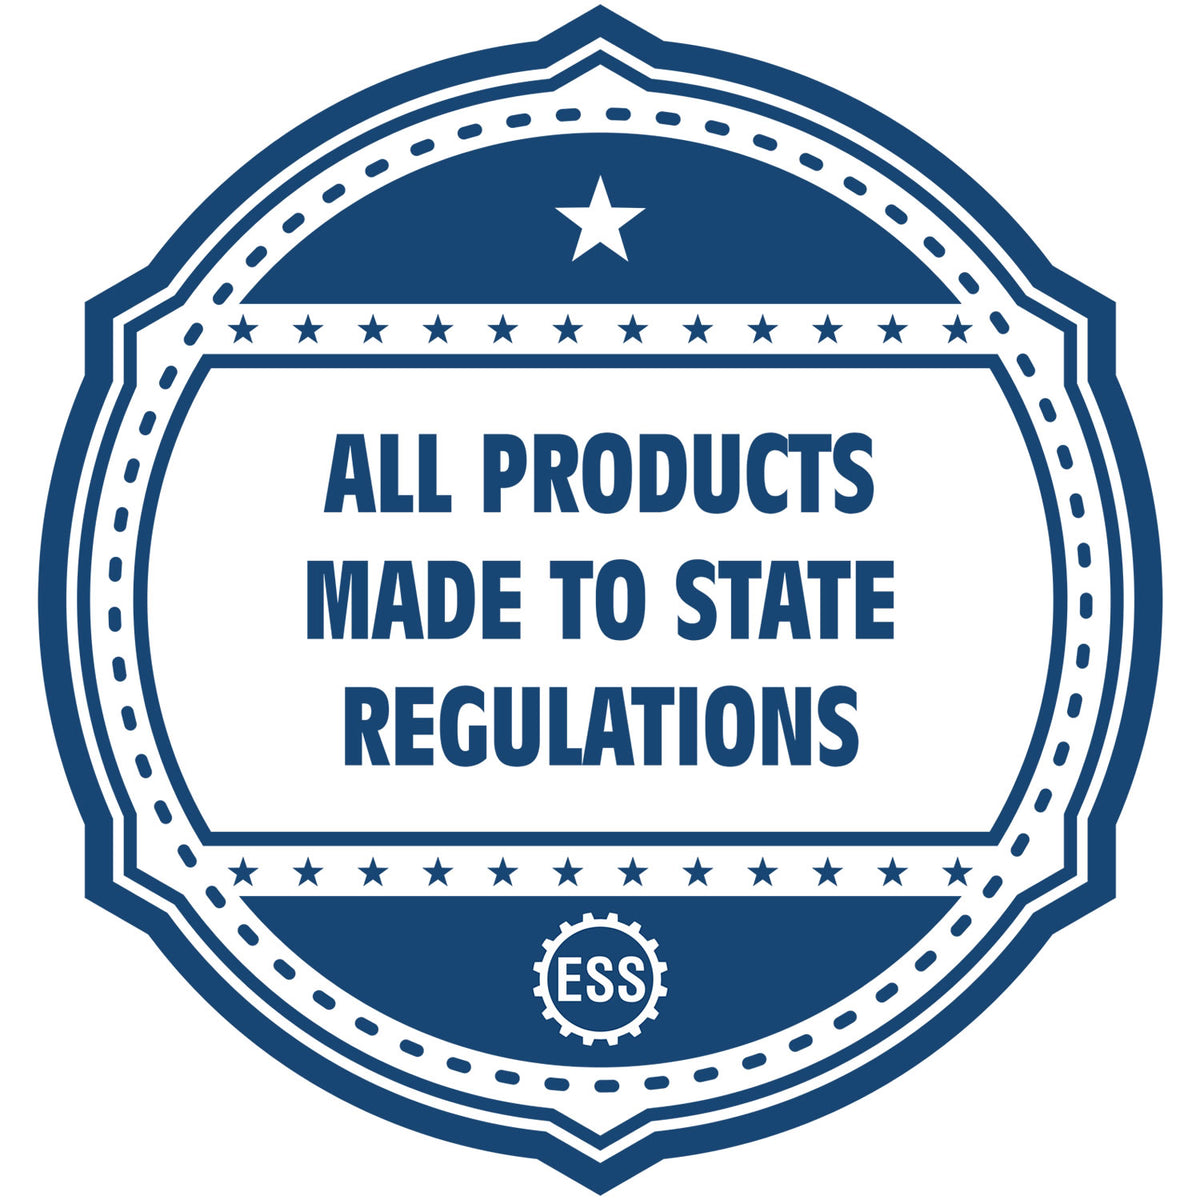 An icon or badge element for the Nebraska Engineer Desk Seal showing that this product is made in compliance with state regulations.